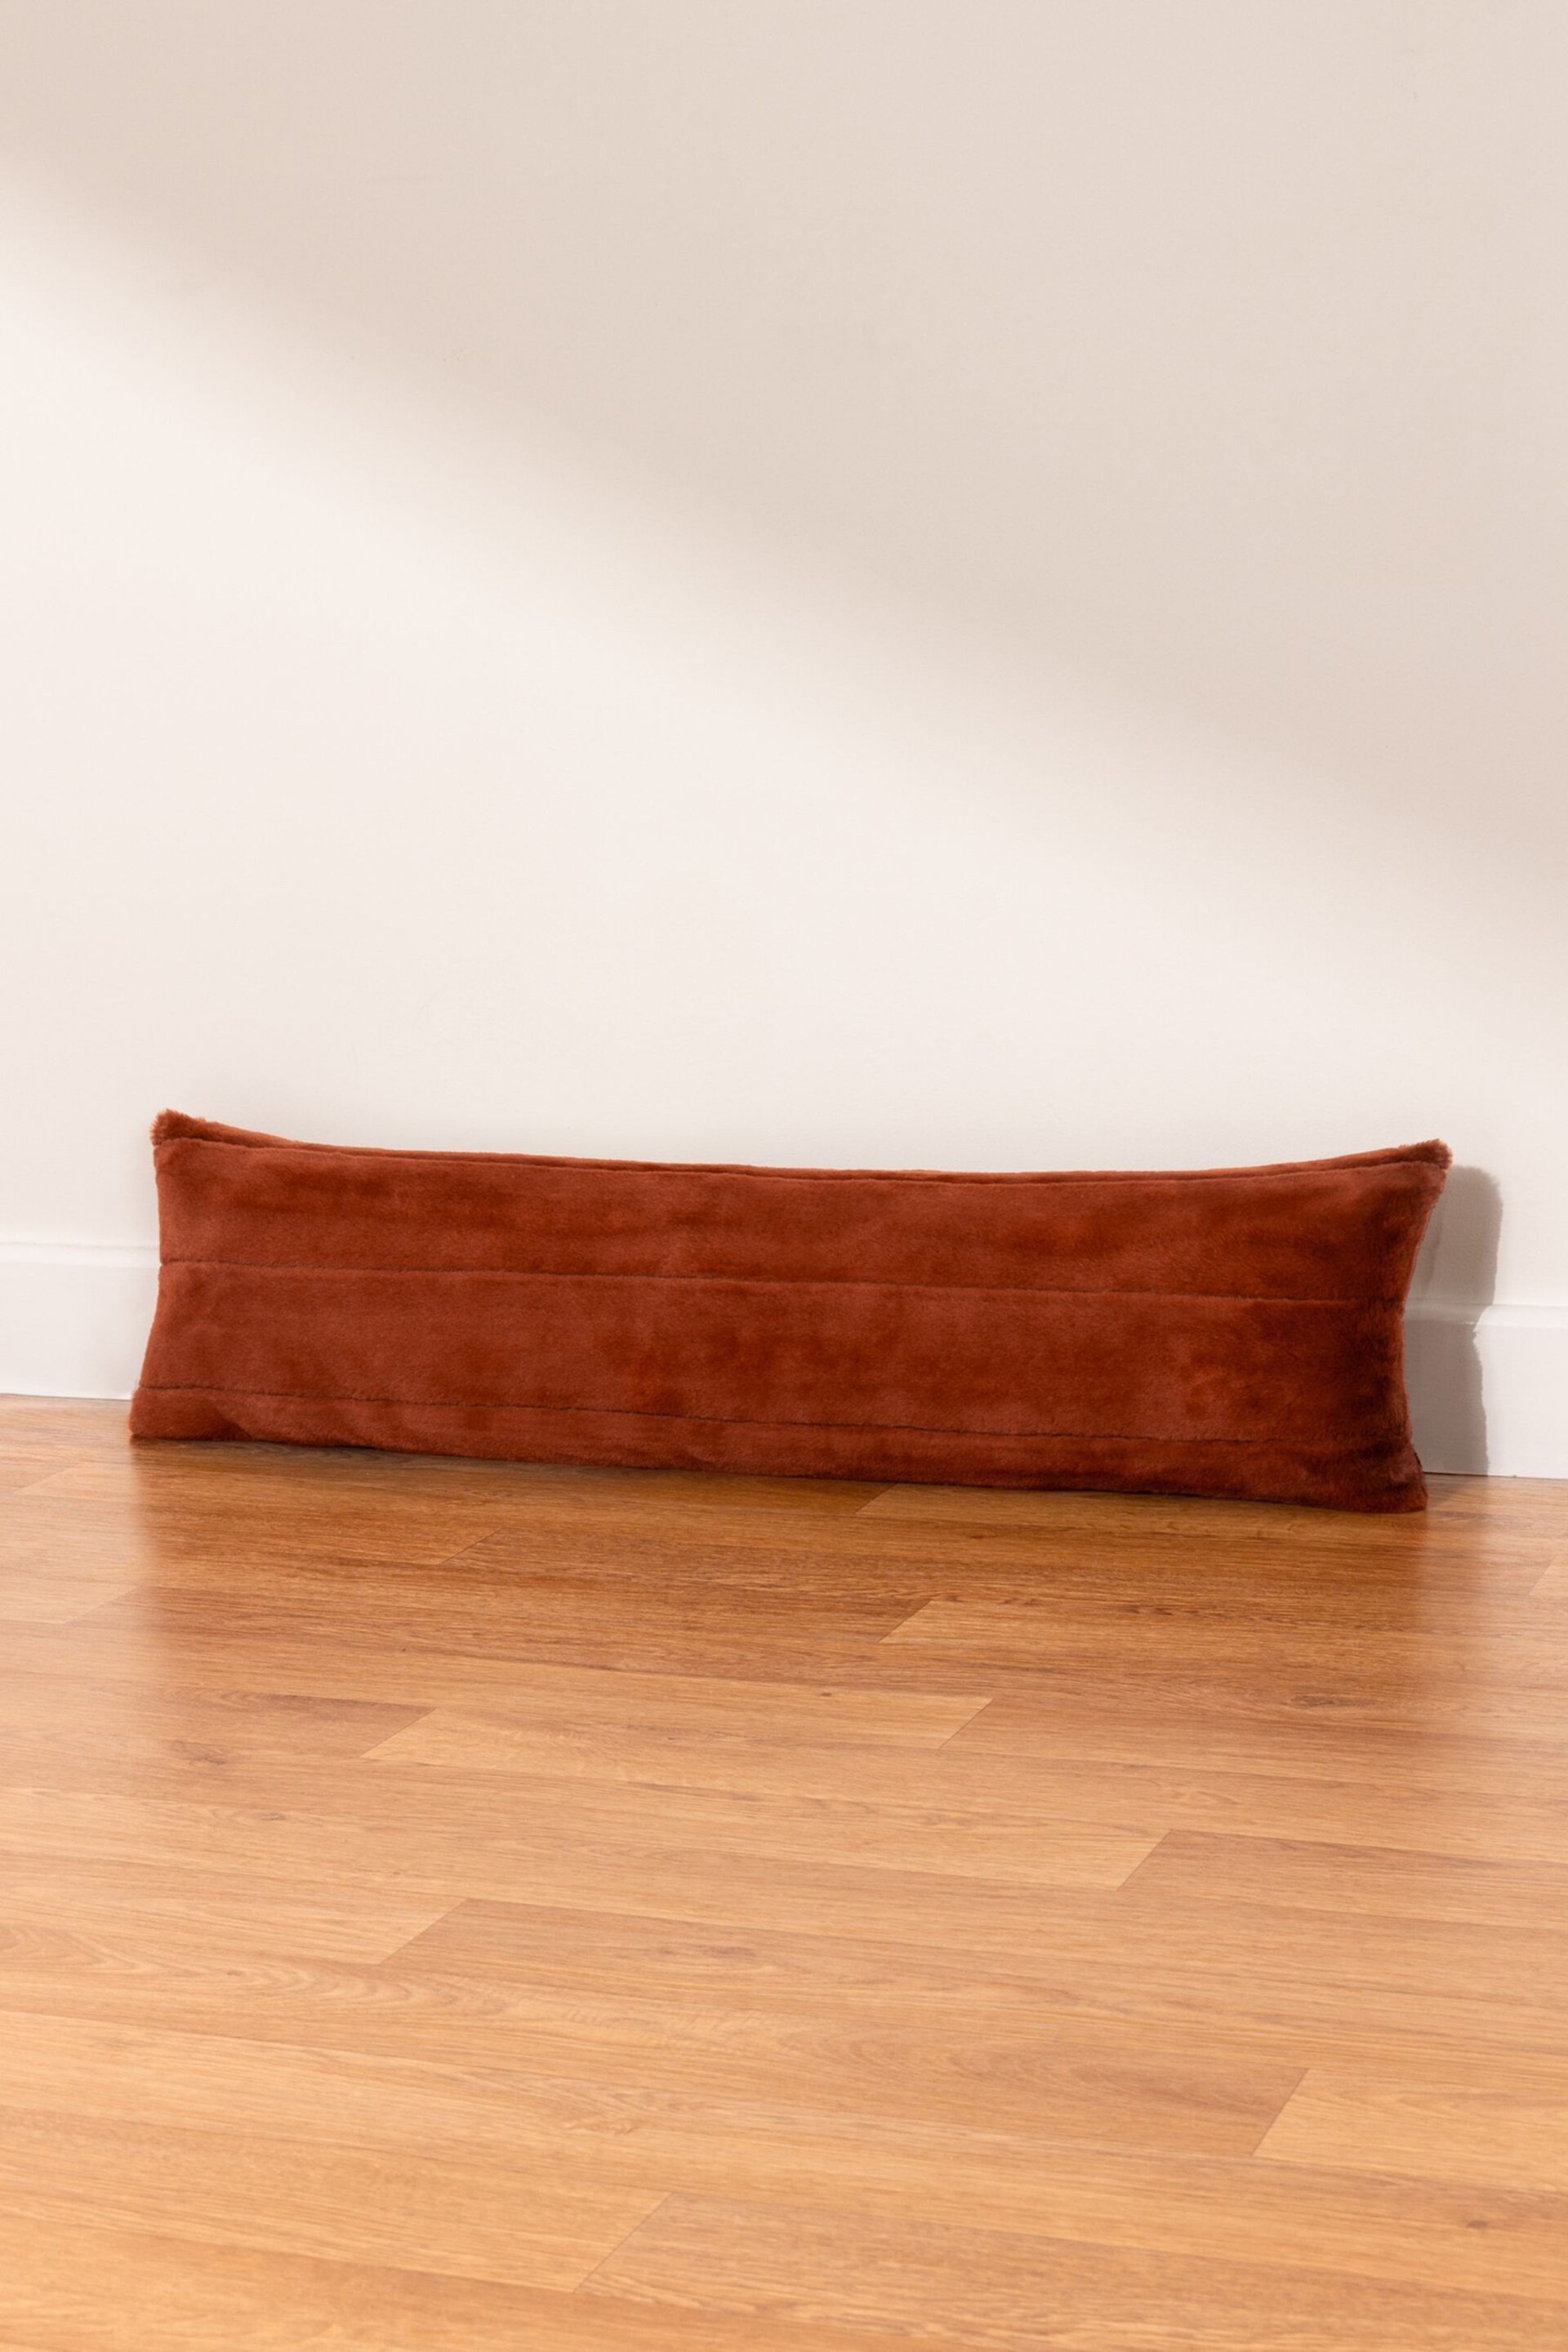 Paoletti Orange Empress Faux Fur Draught Excluder - Image 1 of 2